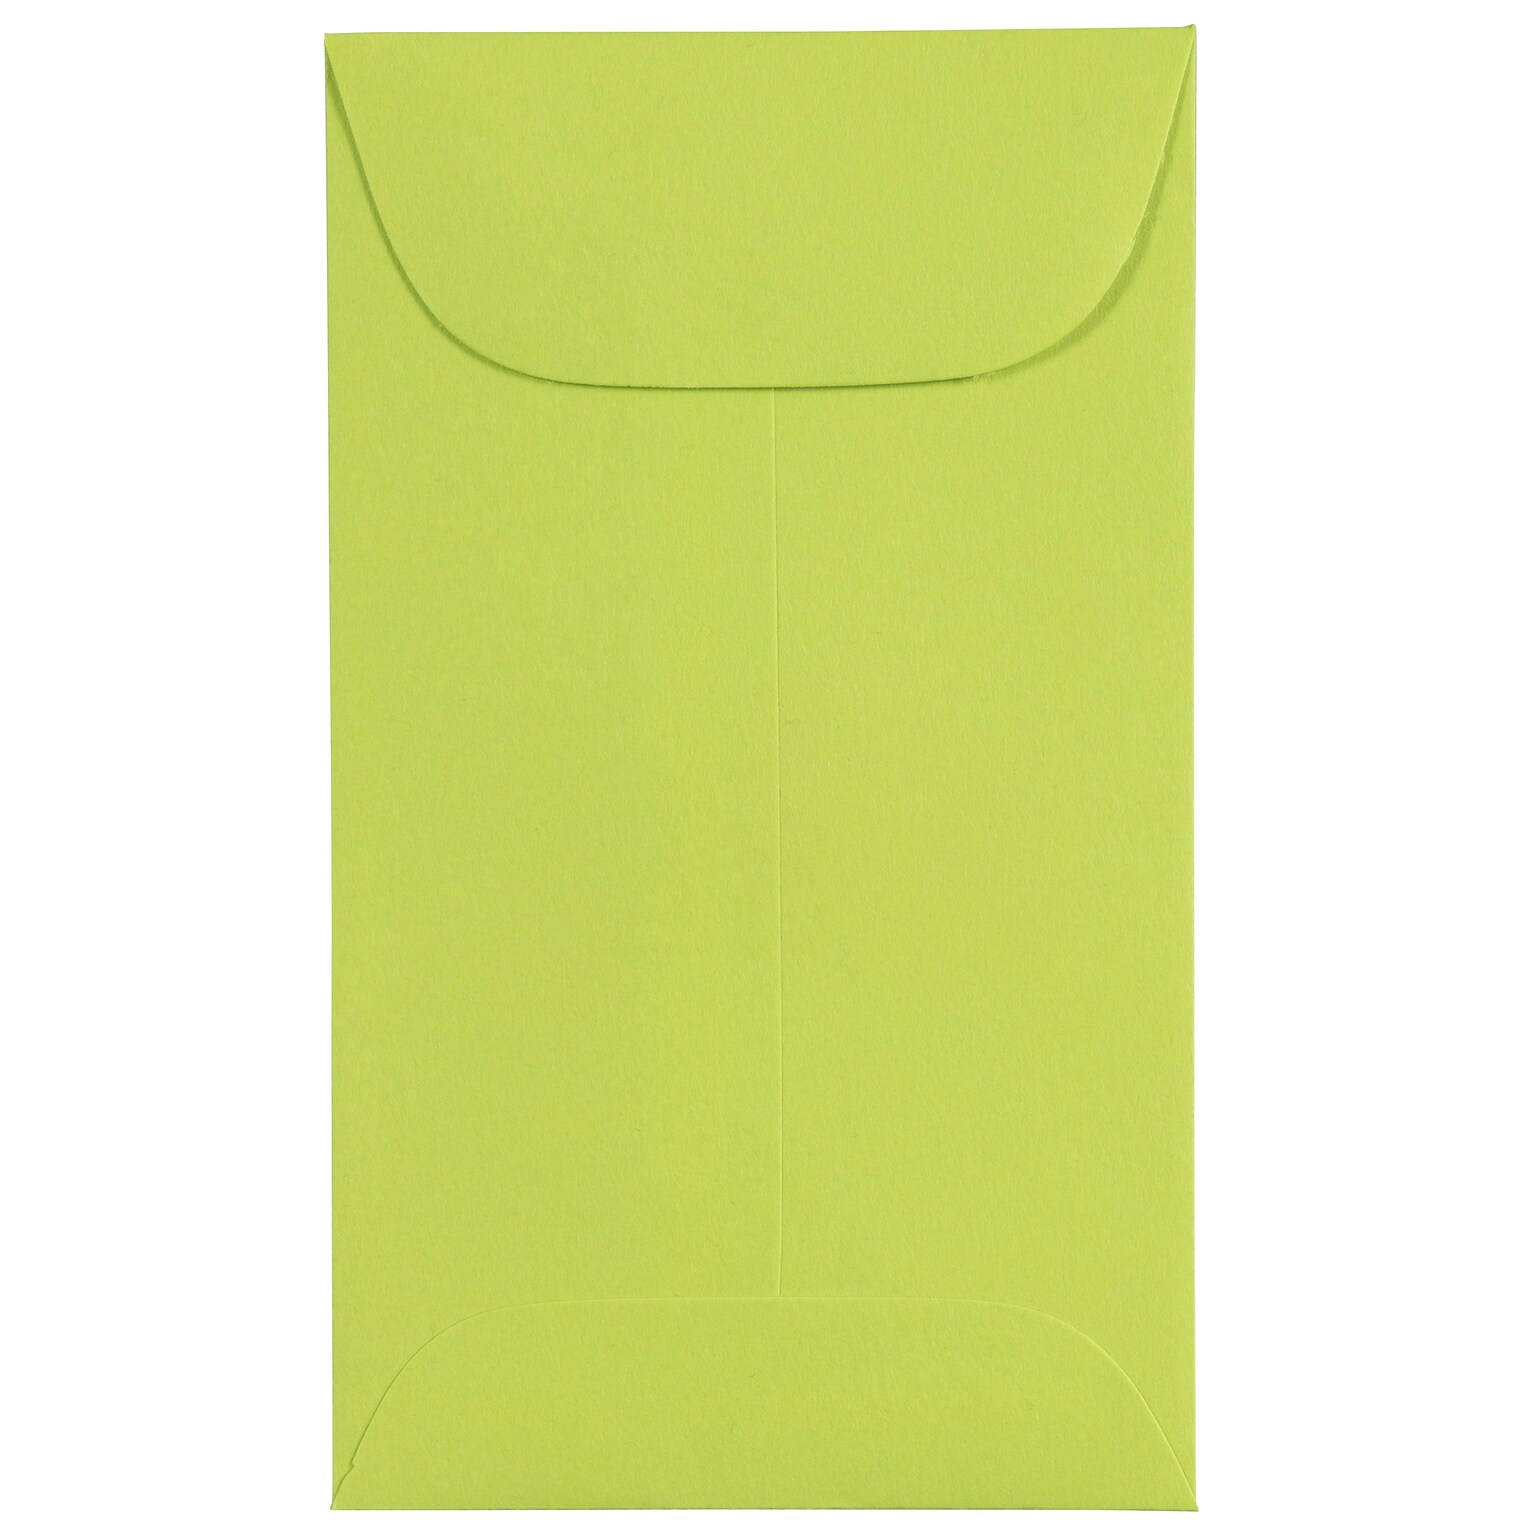 JAM Paper #3 Coin Business Colored Envelopes, 2.5 x 4.25, Ultra Lime Green, 25/Pack (356730536)